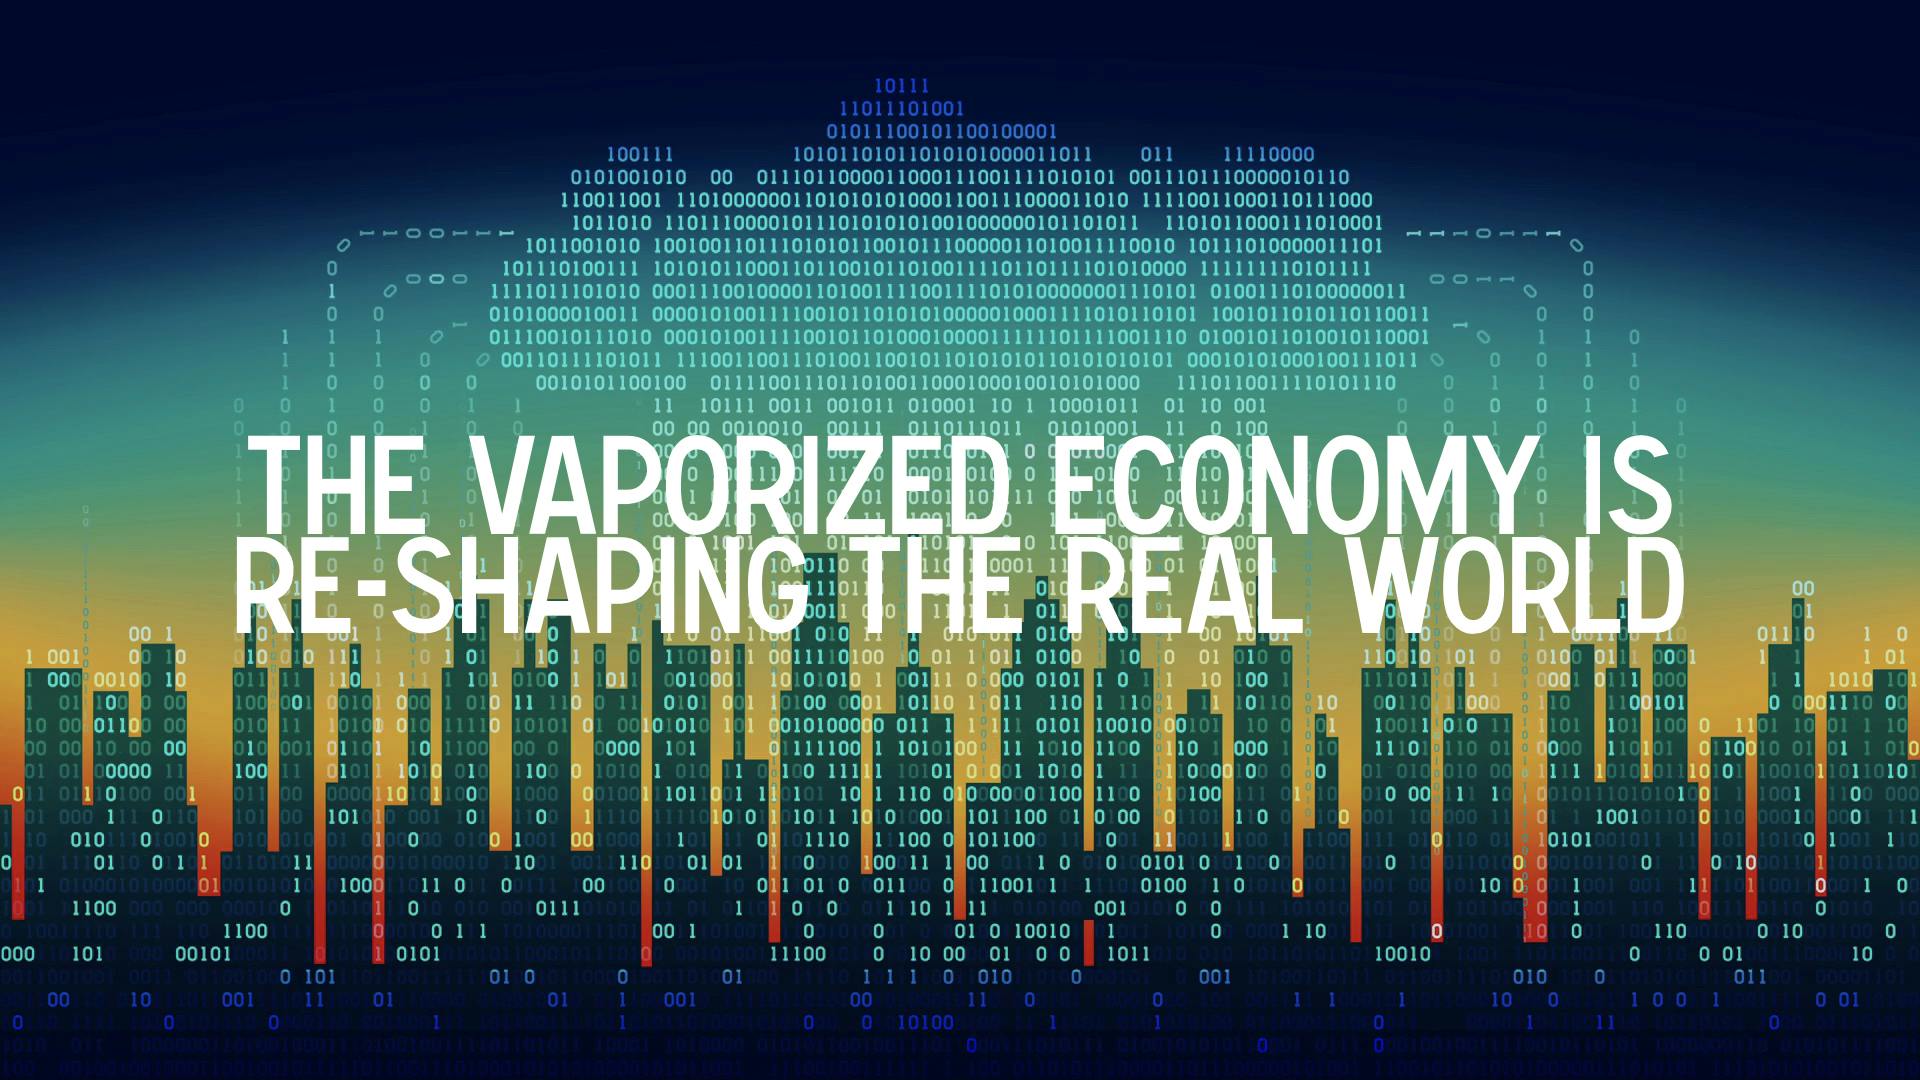 The vaporized economy is re-shaping the real world